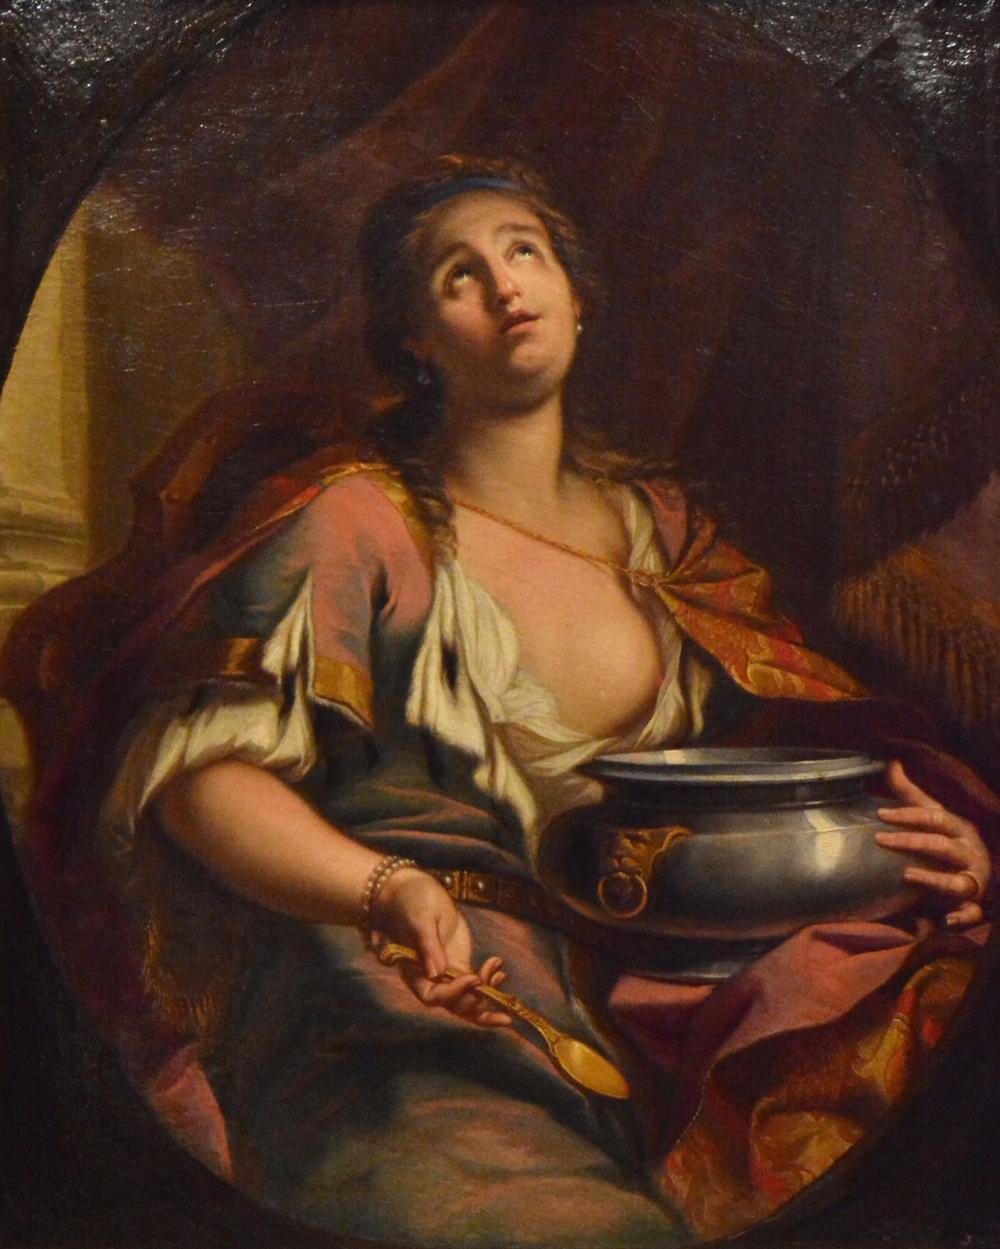 Oil on canvas. A woman holding a pewter tureen. Brass plate reads: Italian school, 17th century, 